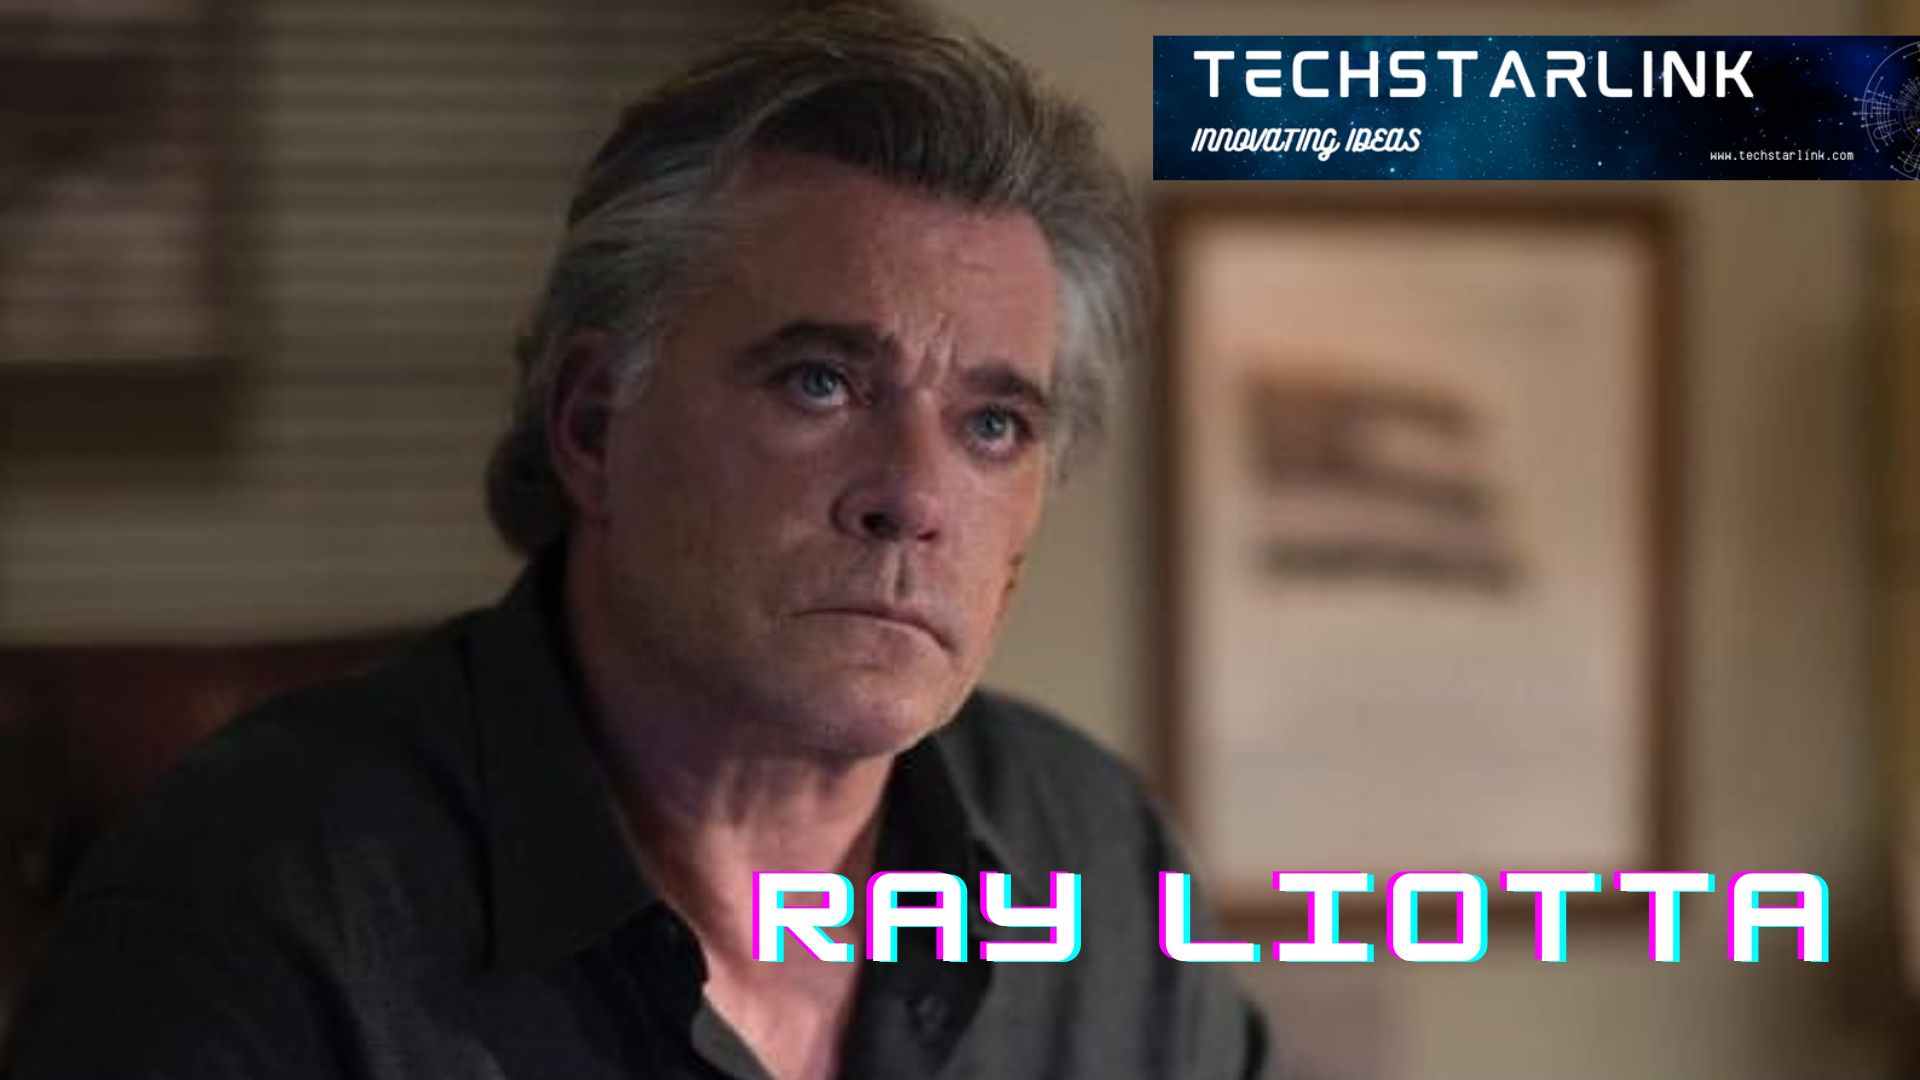 Ray liotta cause of death, Disease or Murder Autospy Revealed?